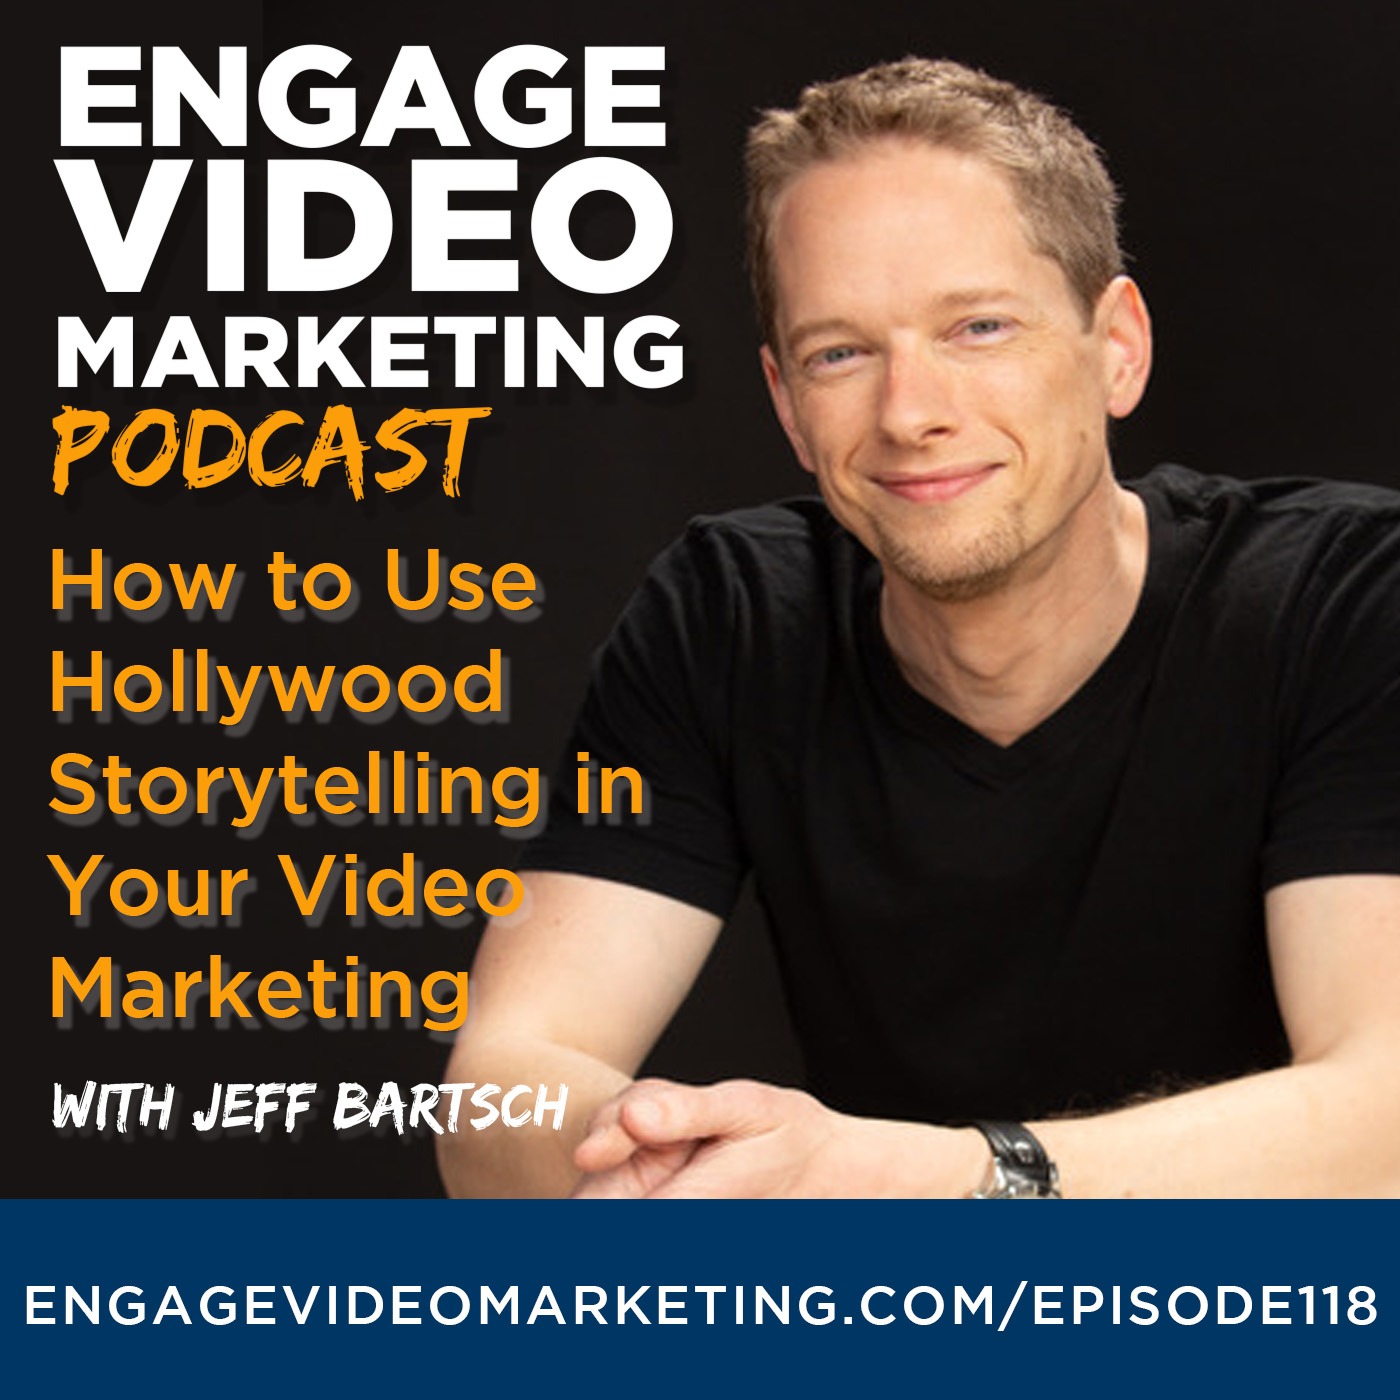 How to Use Hollywood Storytelling in Your Video Marketing with Jeff Bartsch